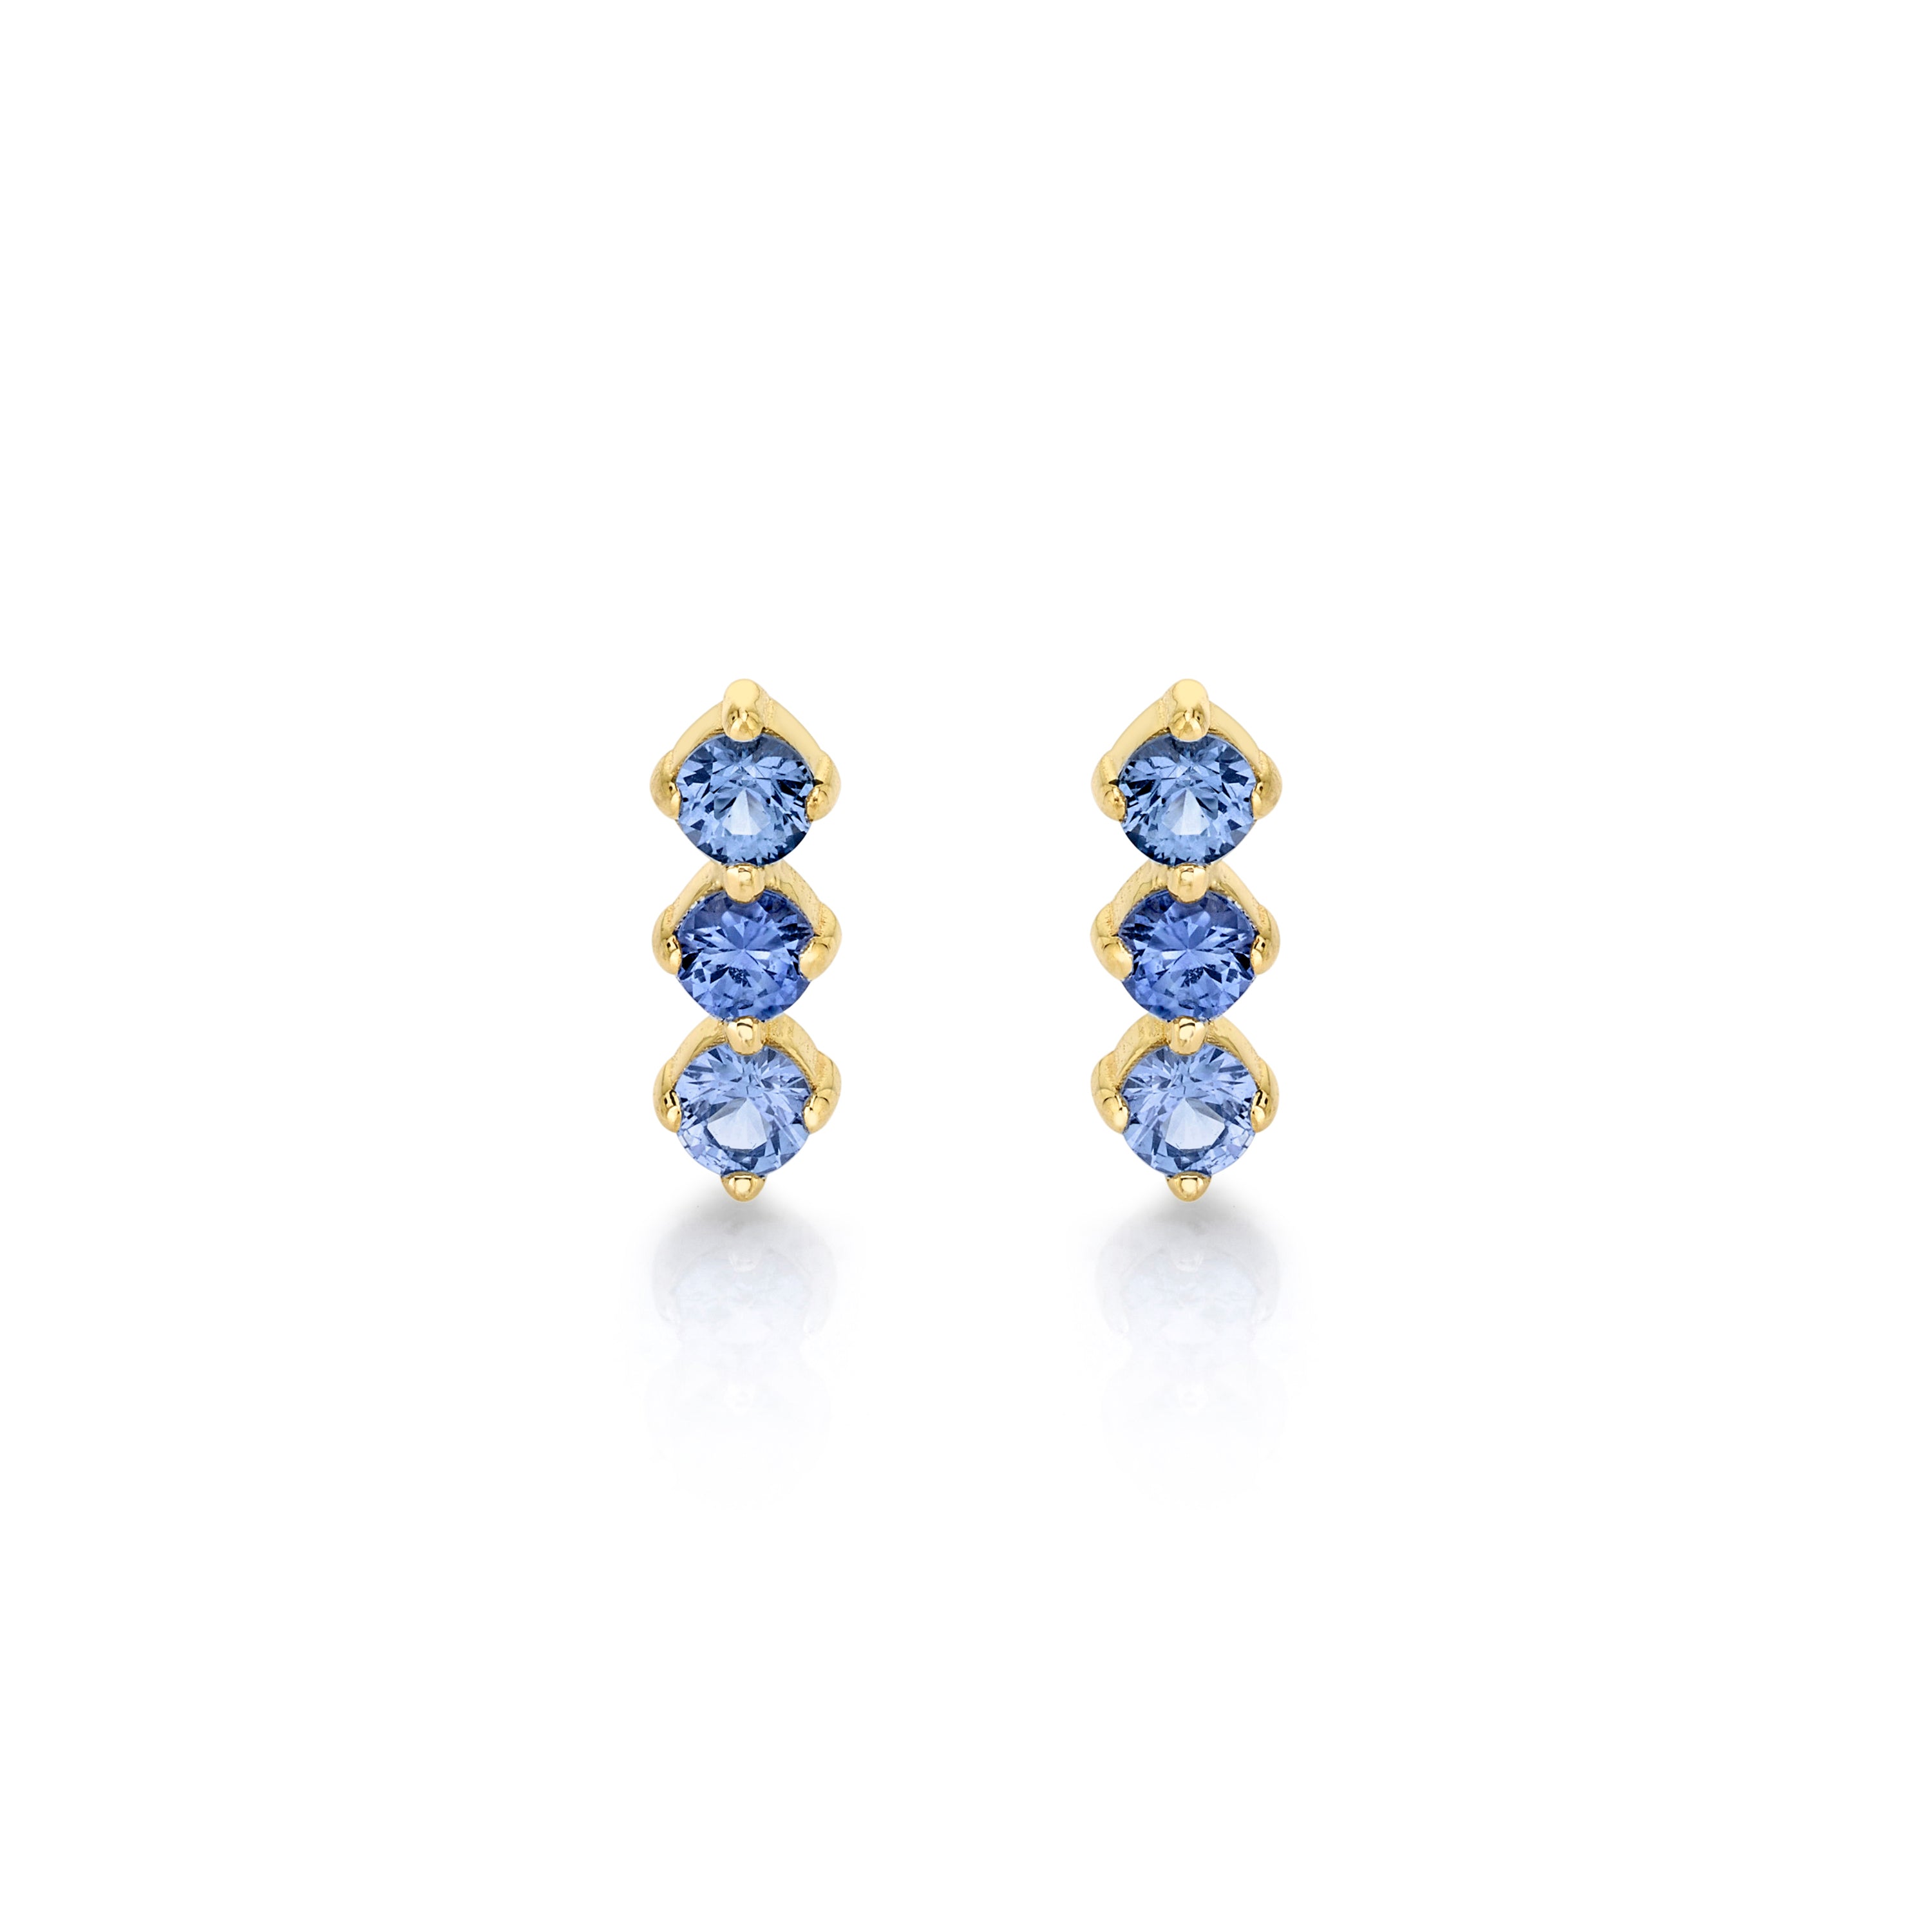 14ky gold blue sapphire stud earrings. Shop now for a touch of luxury.